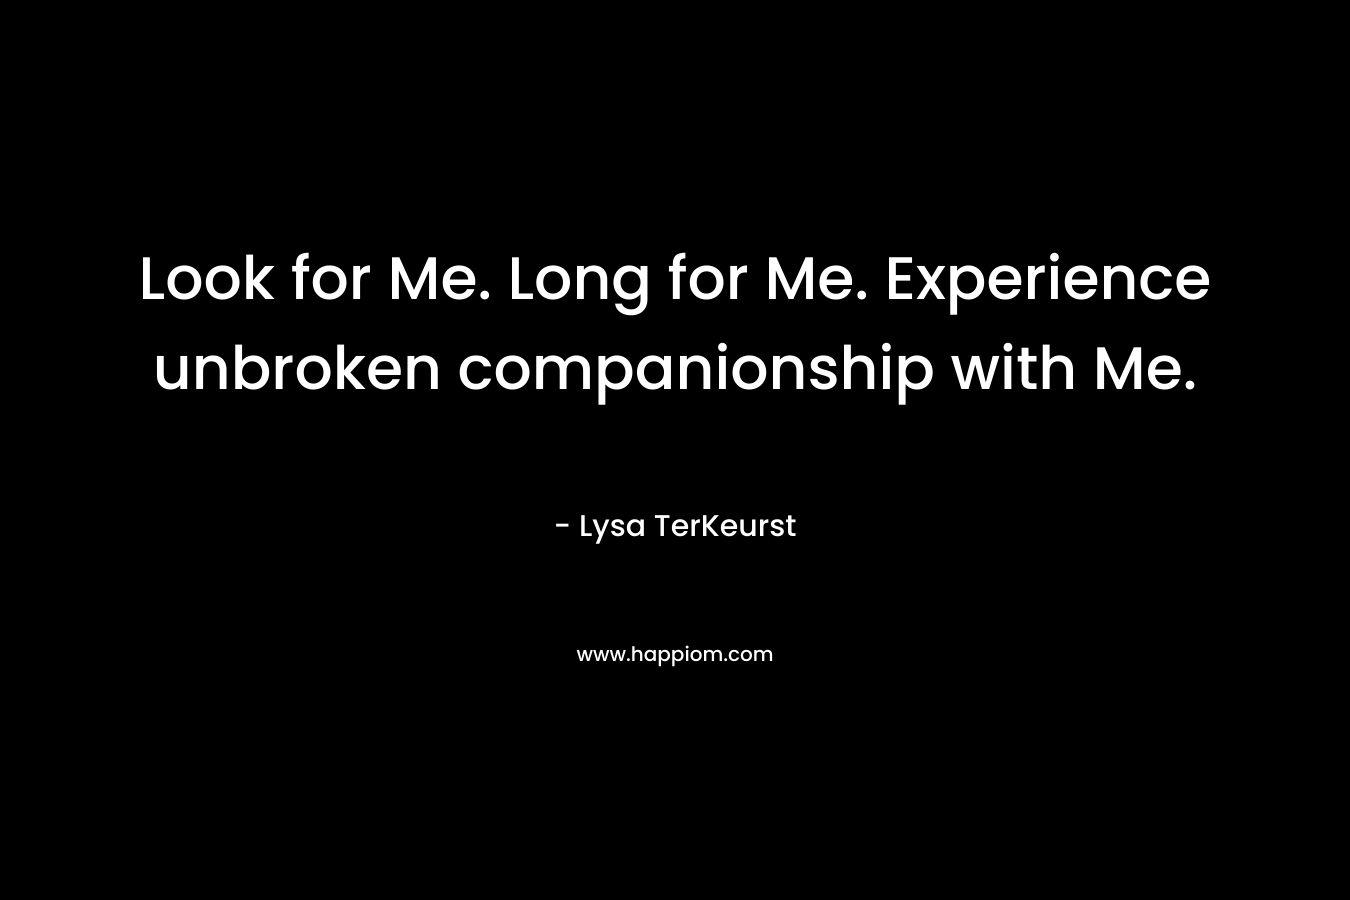 Look for Me. Long for Me. Experience unbroken companionship with Me. – Lysa TerKeurst